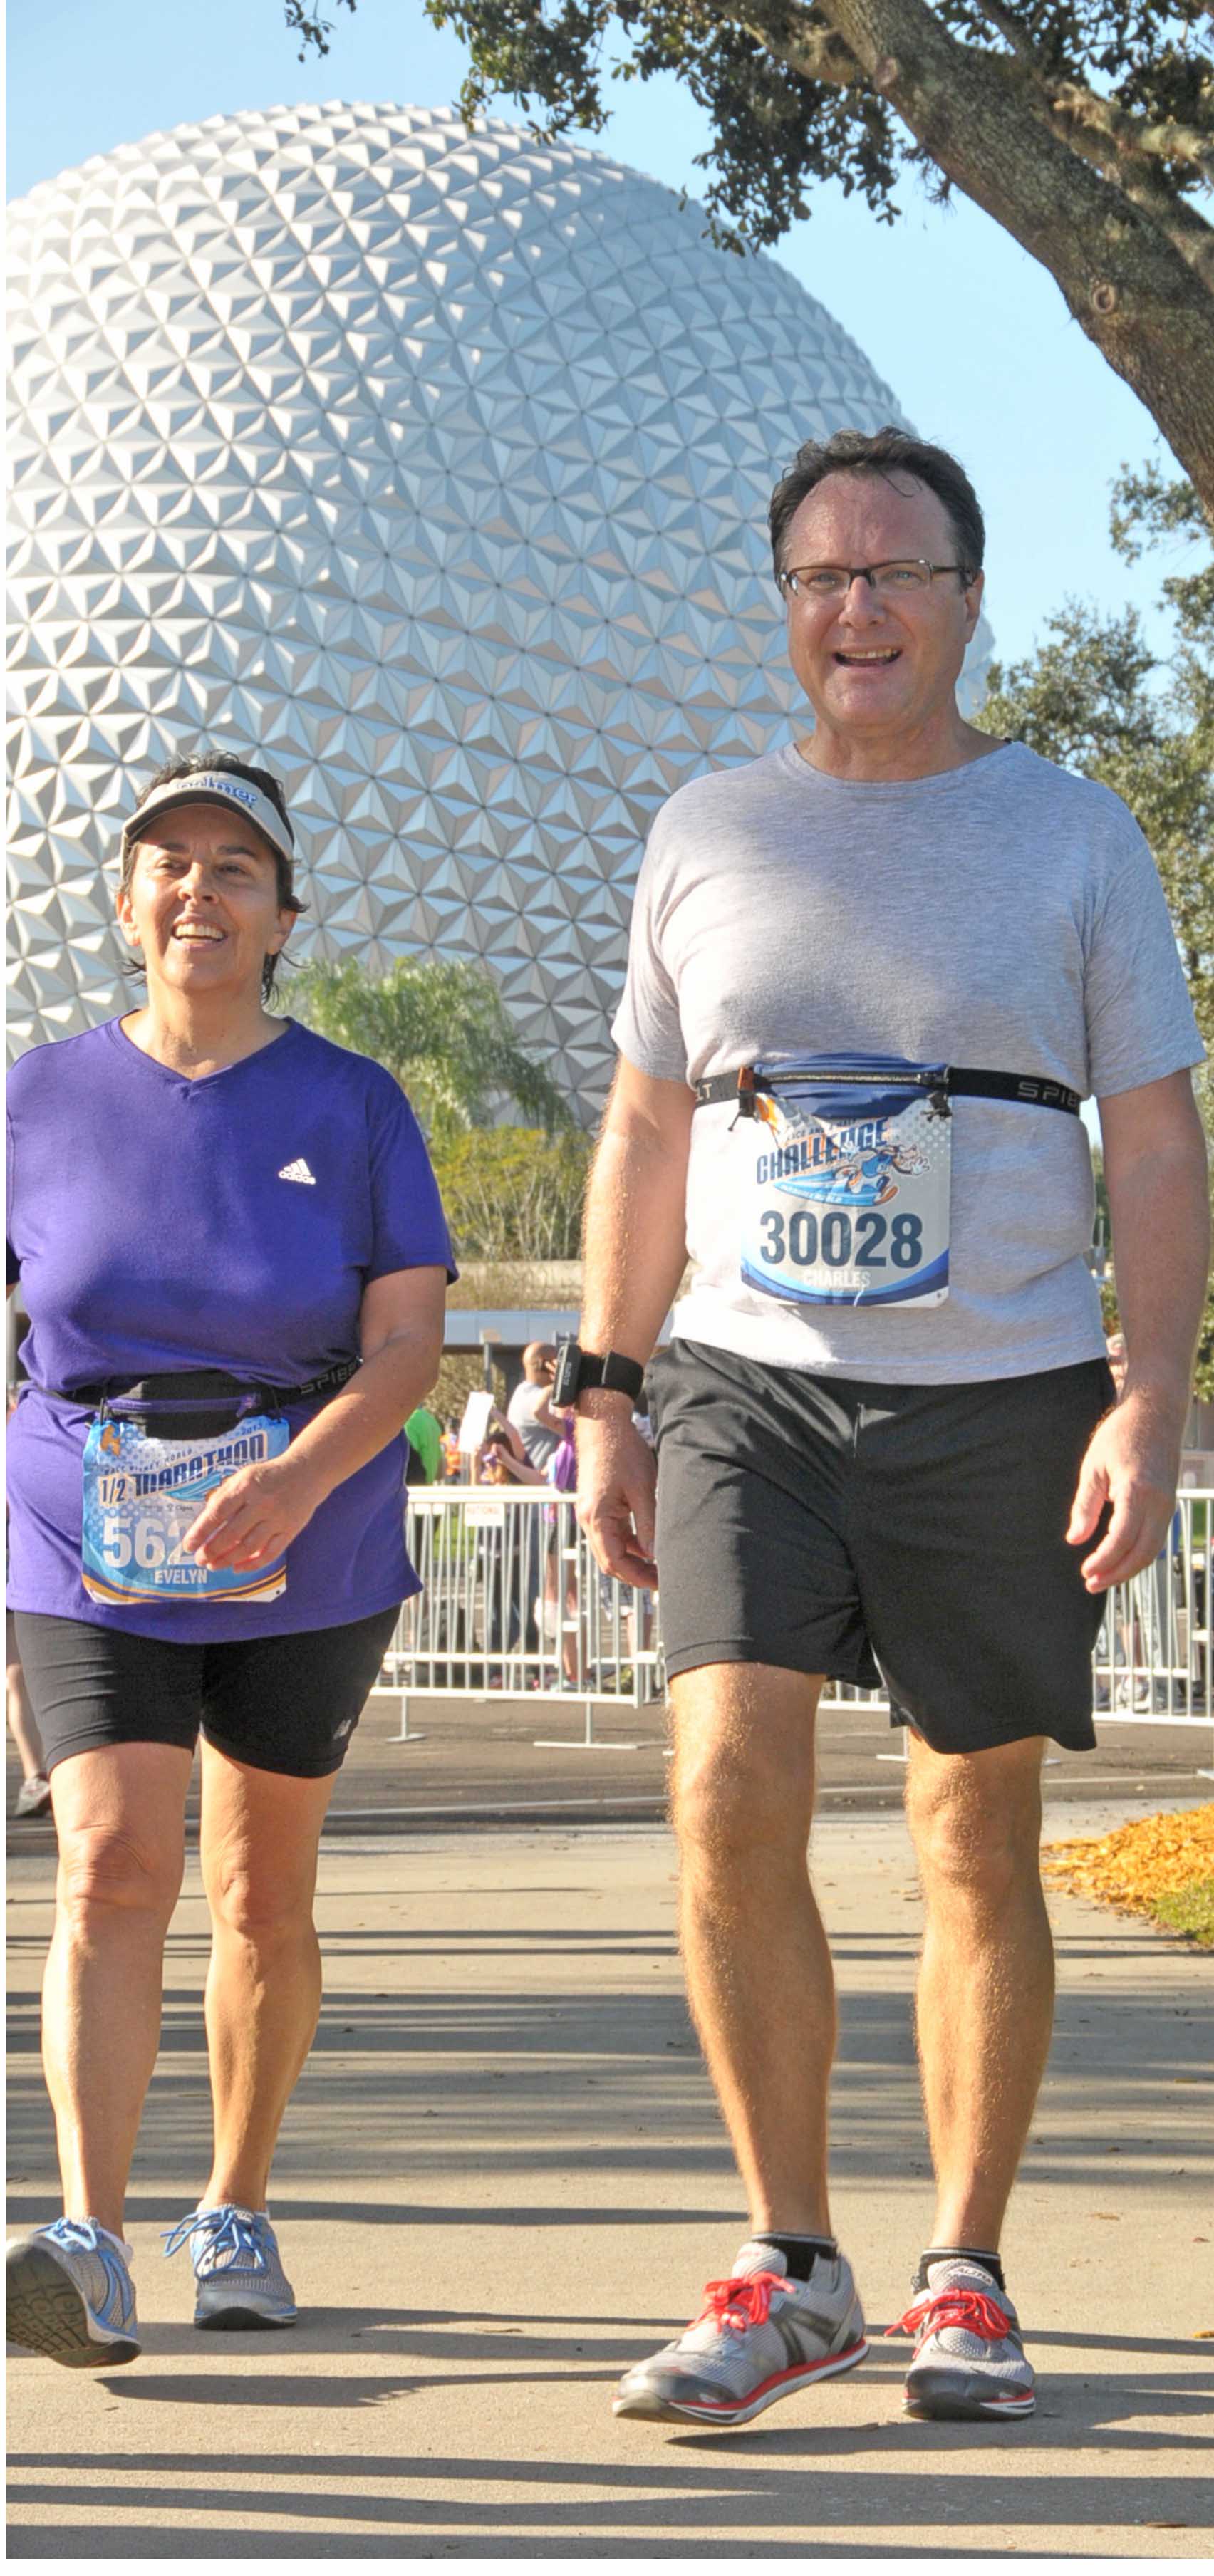 [photo-Evelyn&Charlie in Epcot]